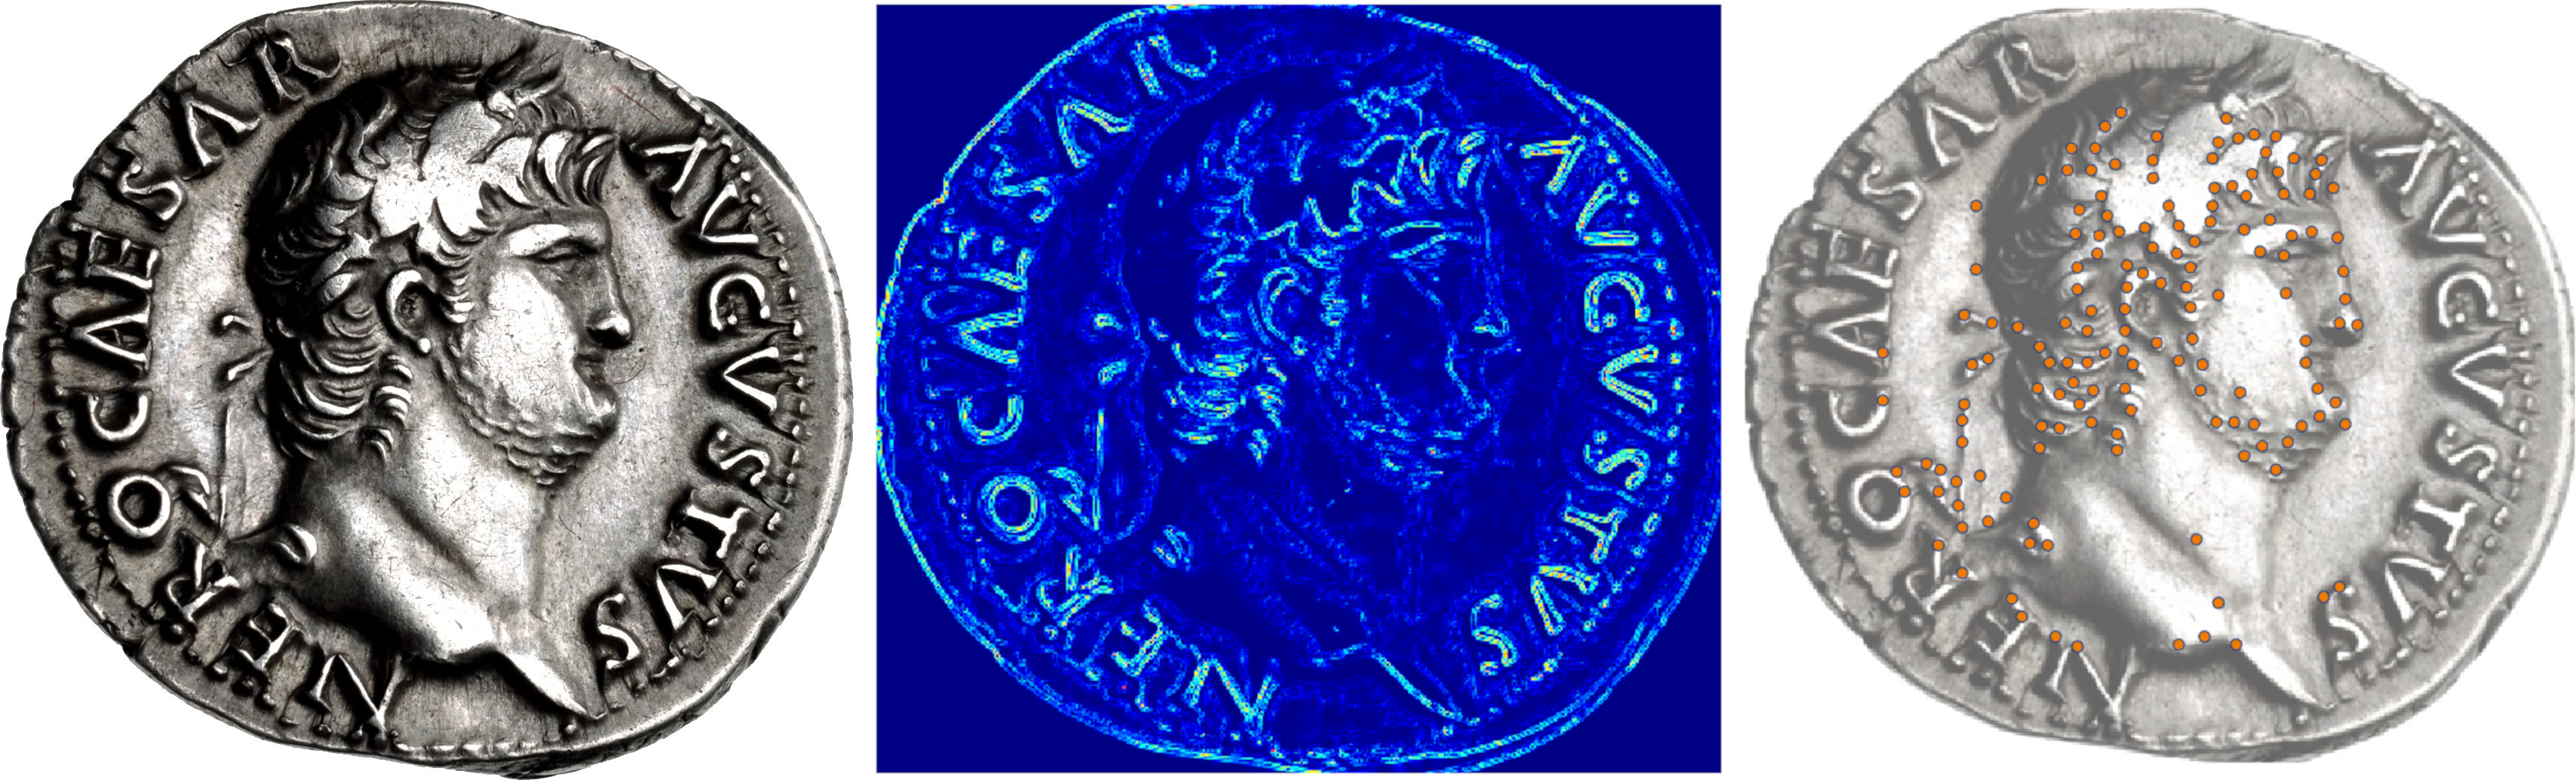 Unsupervised Statistical Learning for Die Analysis in Ancient Numismatics